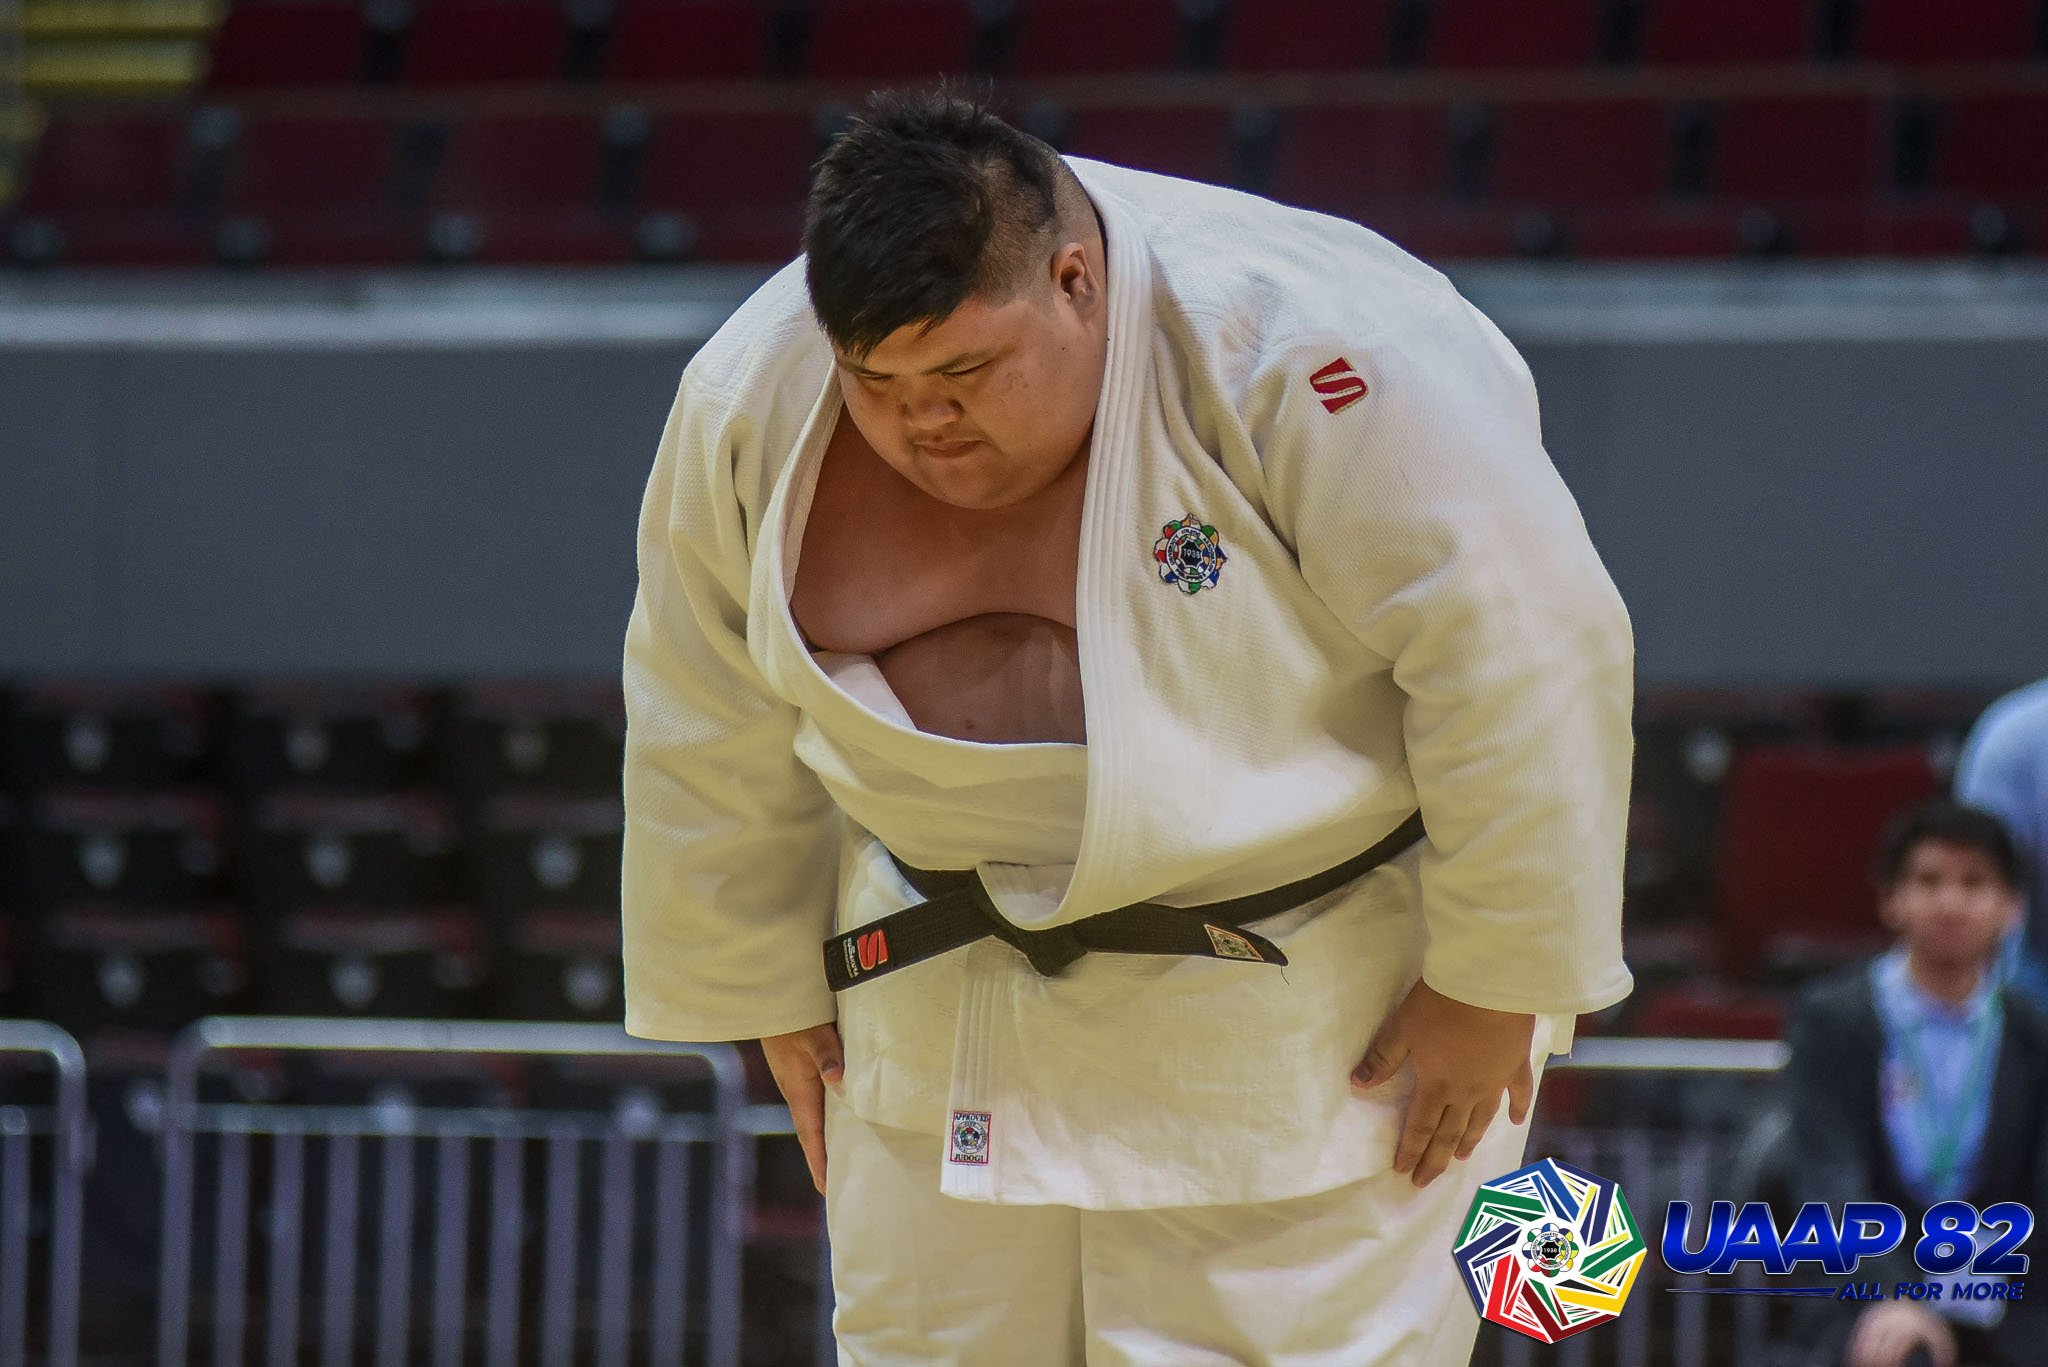 UAAP82-JUDO-SRS-100KG-MENS-3RD-PHOTO-WHITE-TABLAN-UST Zarchie Garay stuns Keith Reyes as UP holds lead over UST in UAAP Judo ADMU DLSU Judo News UAAP UP UST  - philippine sports news